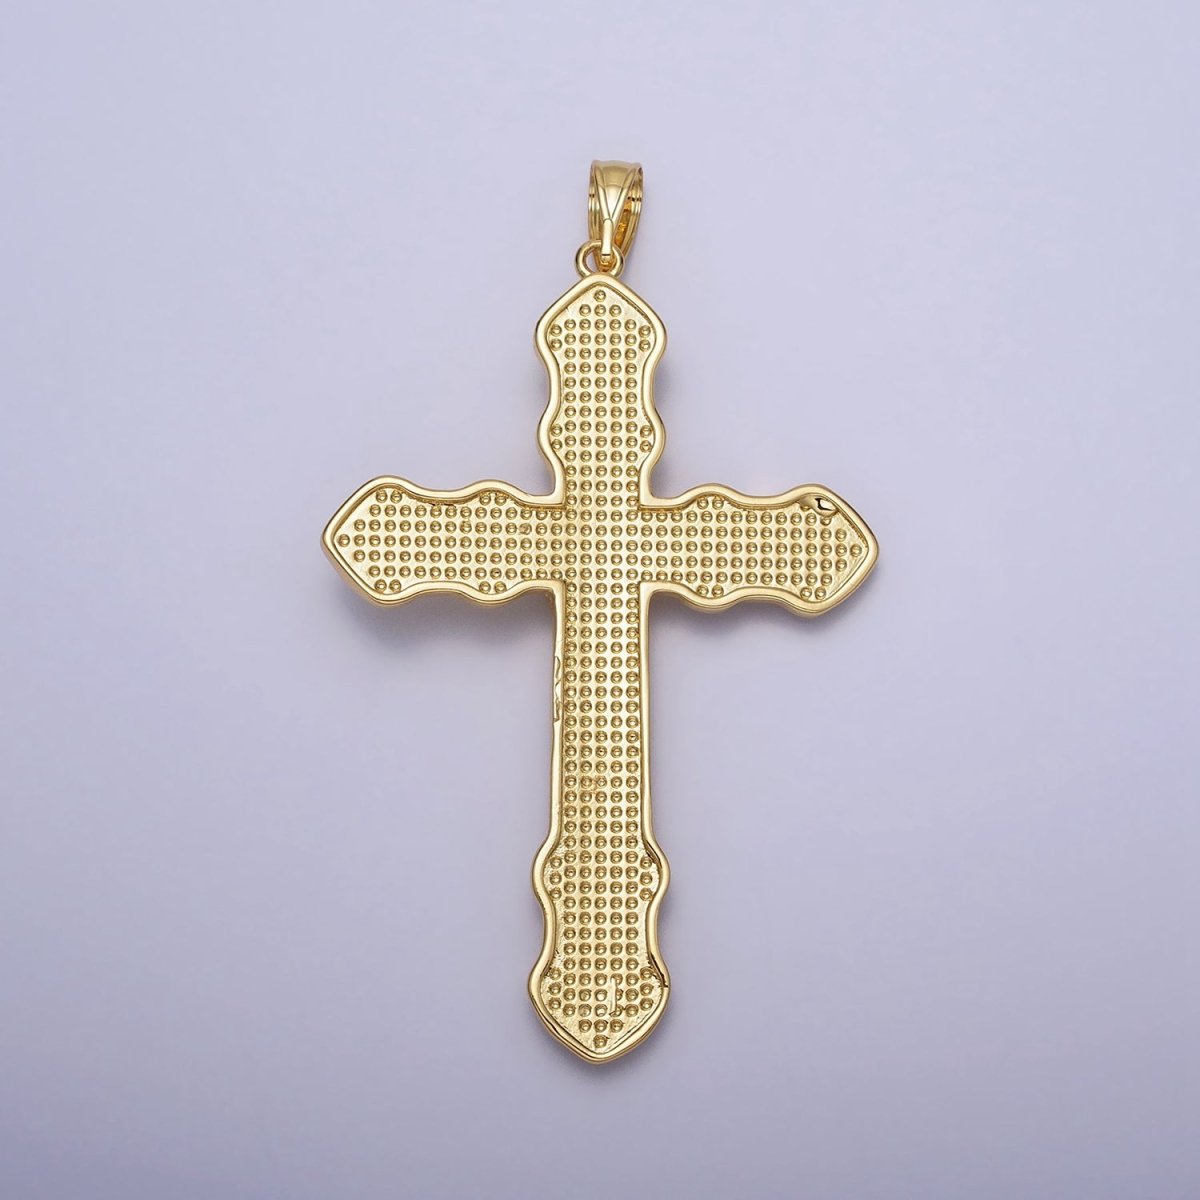 Gold Crucifix Cross Leaf Nature-Themed Religious Pendant | AA084 - DLUXCA